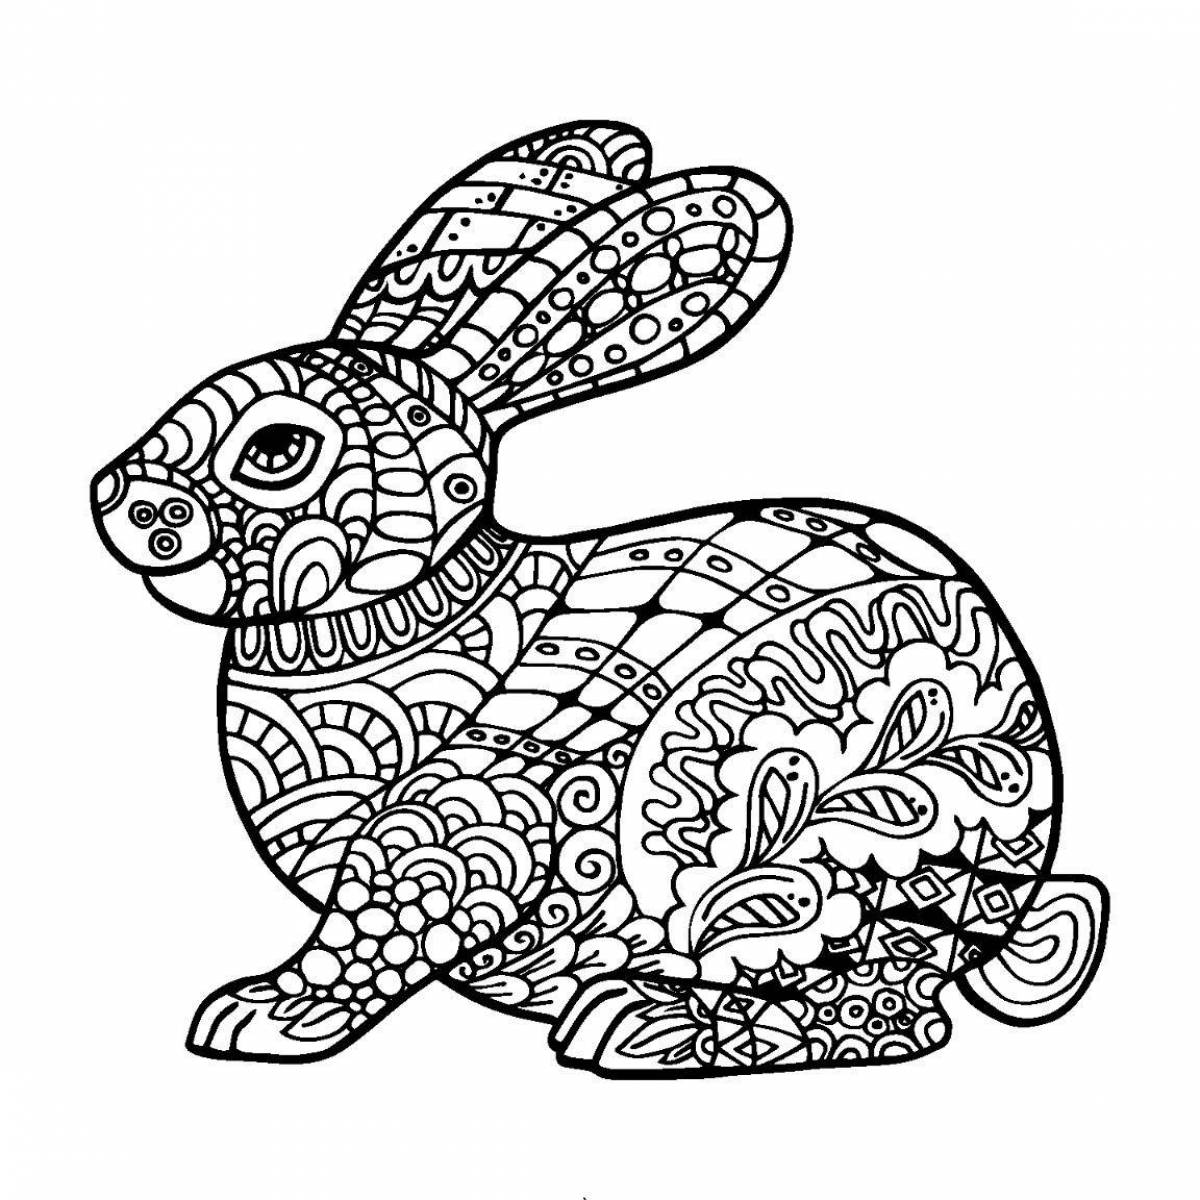 Exquisite anti-stress coloring bunny